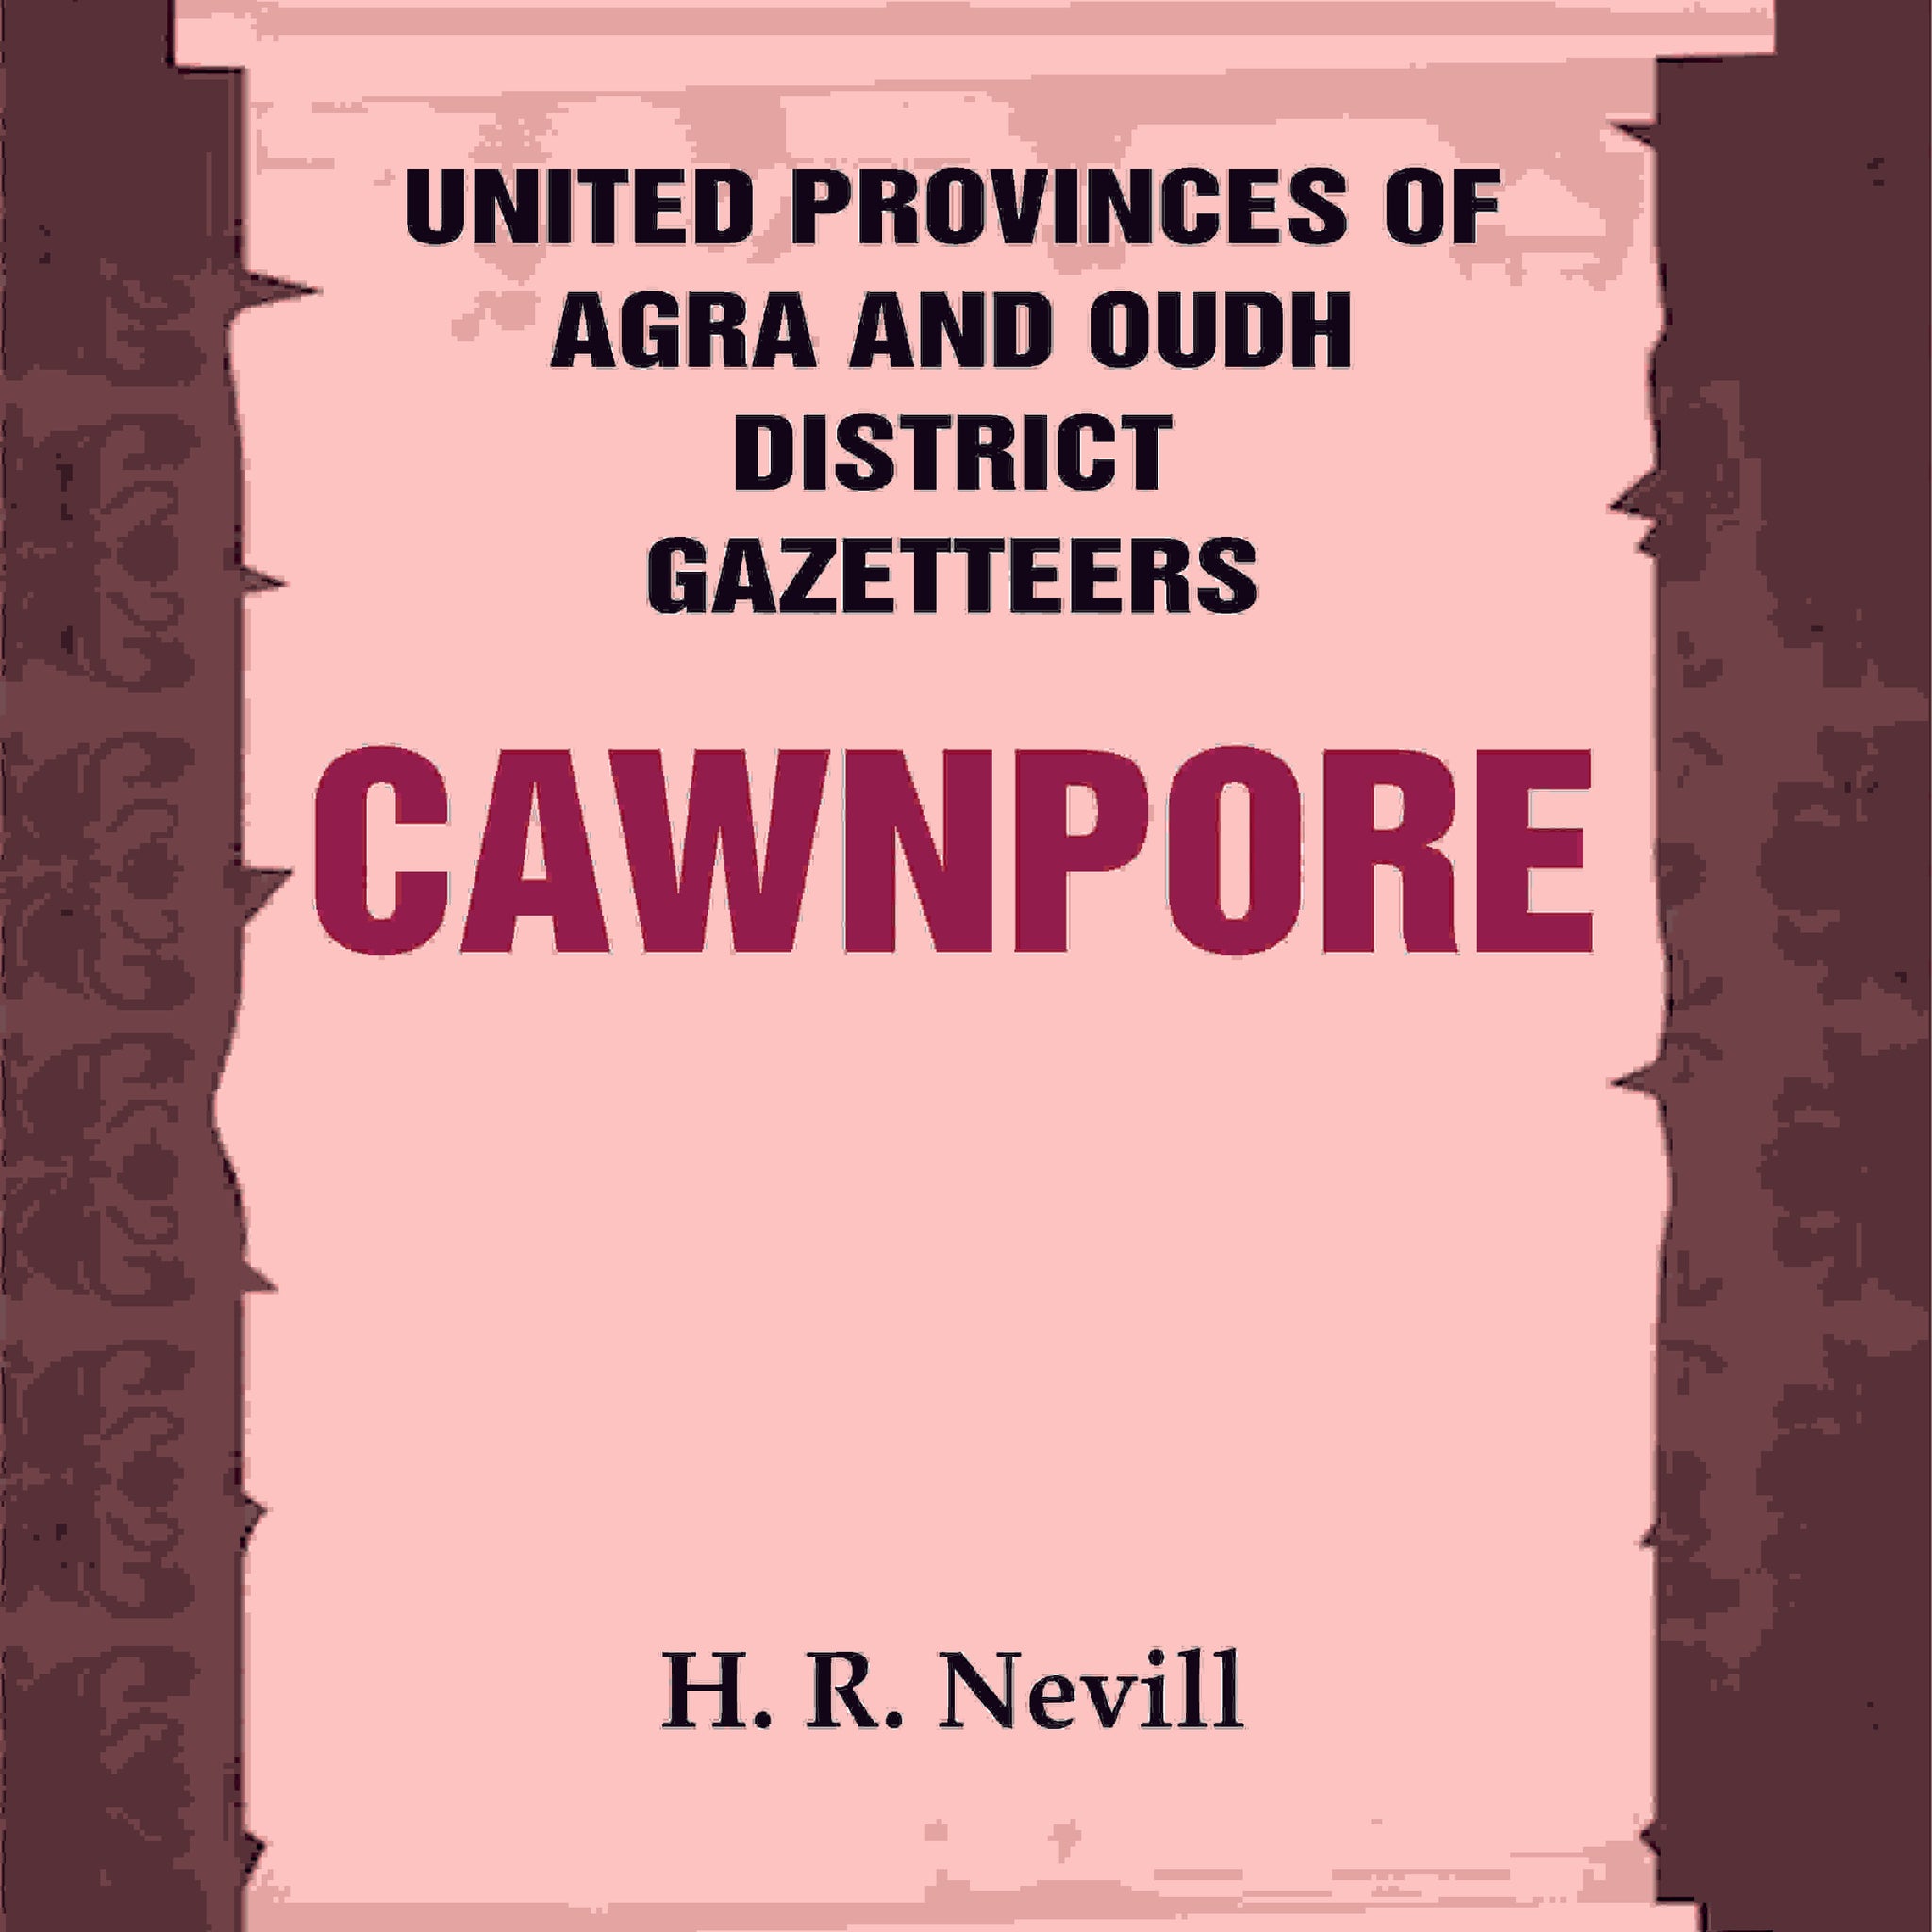 United Provinces of Agra and Oudh District Gazetteers: Cawnpore